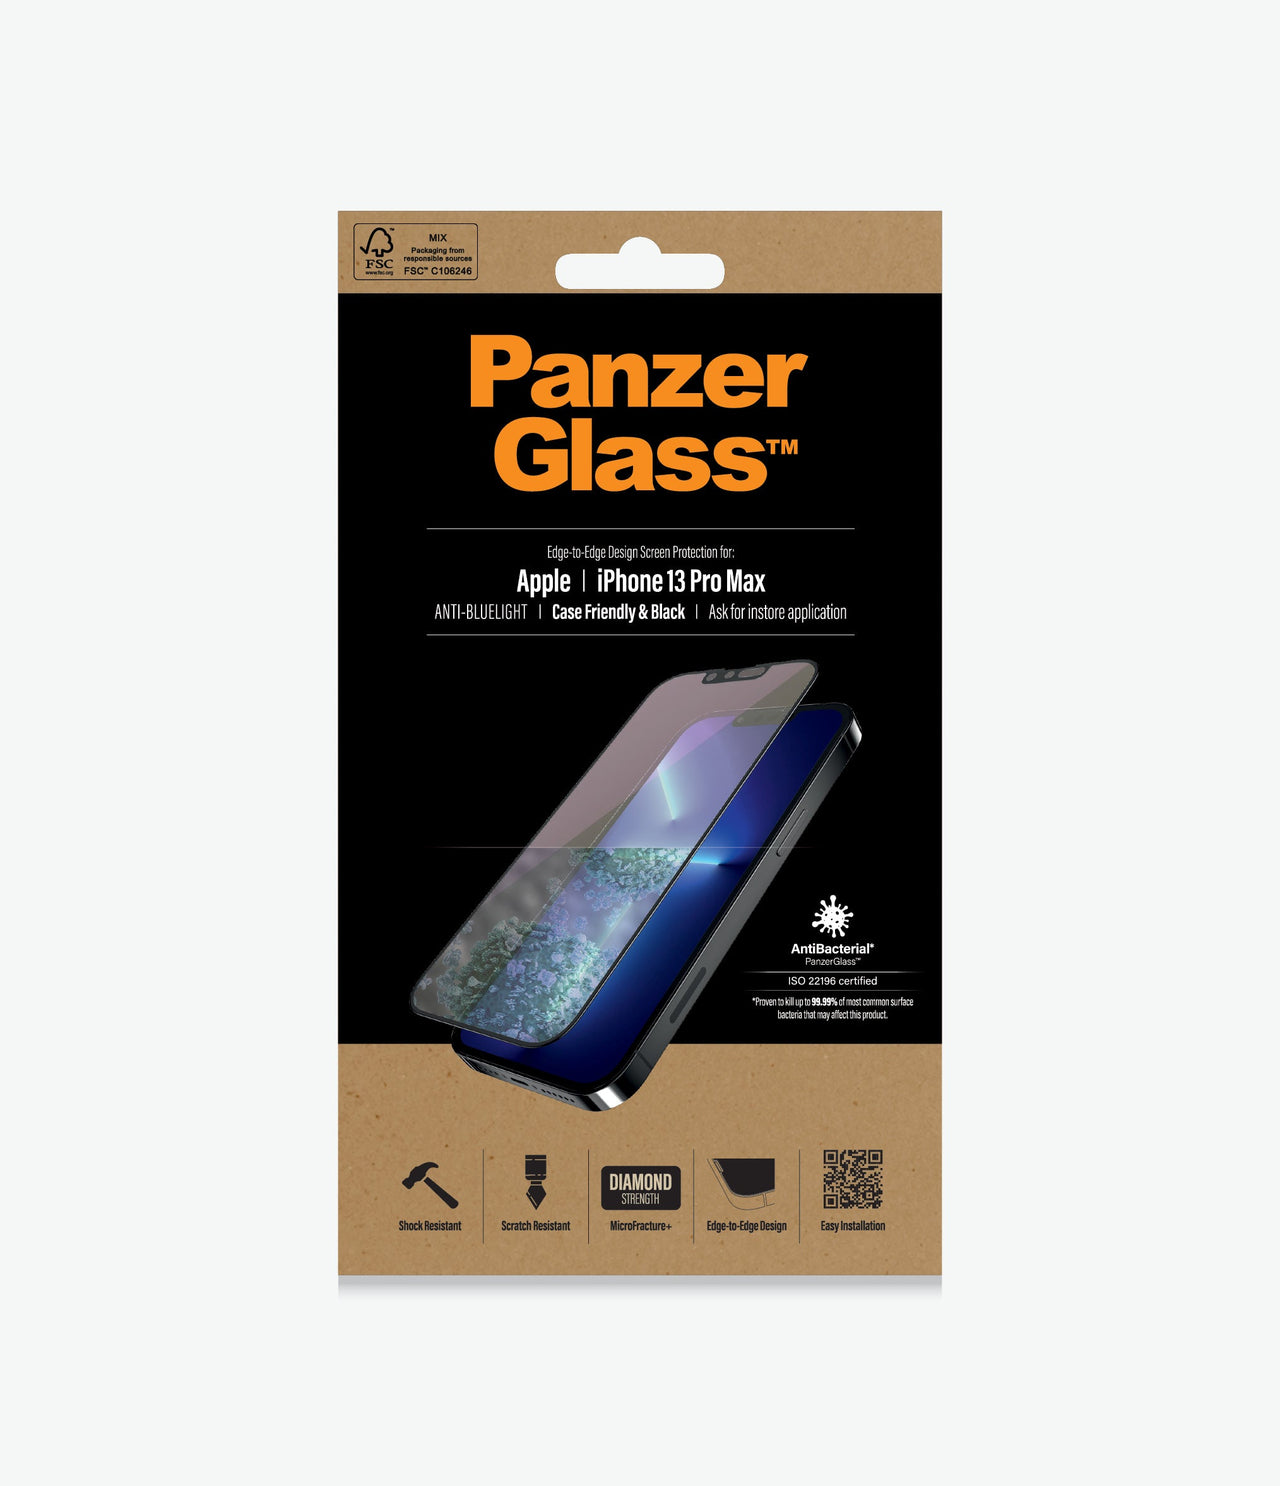 Panzer Glass Anti-bluelight Screen Protector for iPhone 13 Pro Max - Black